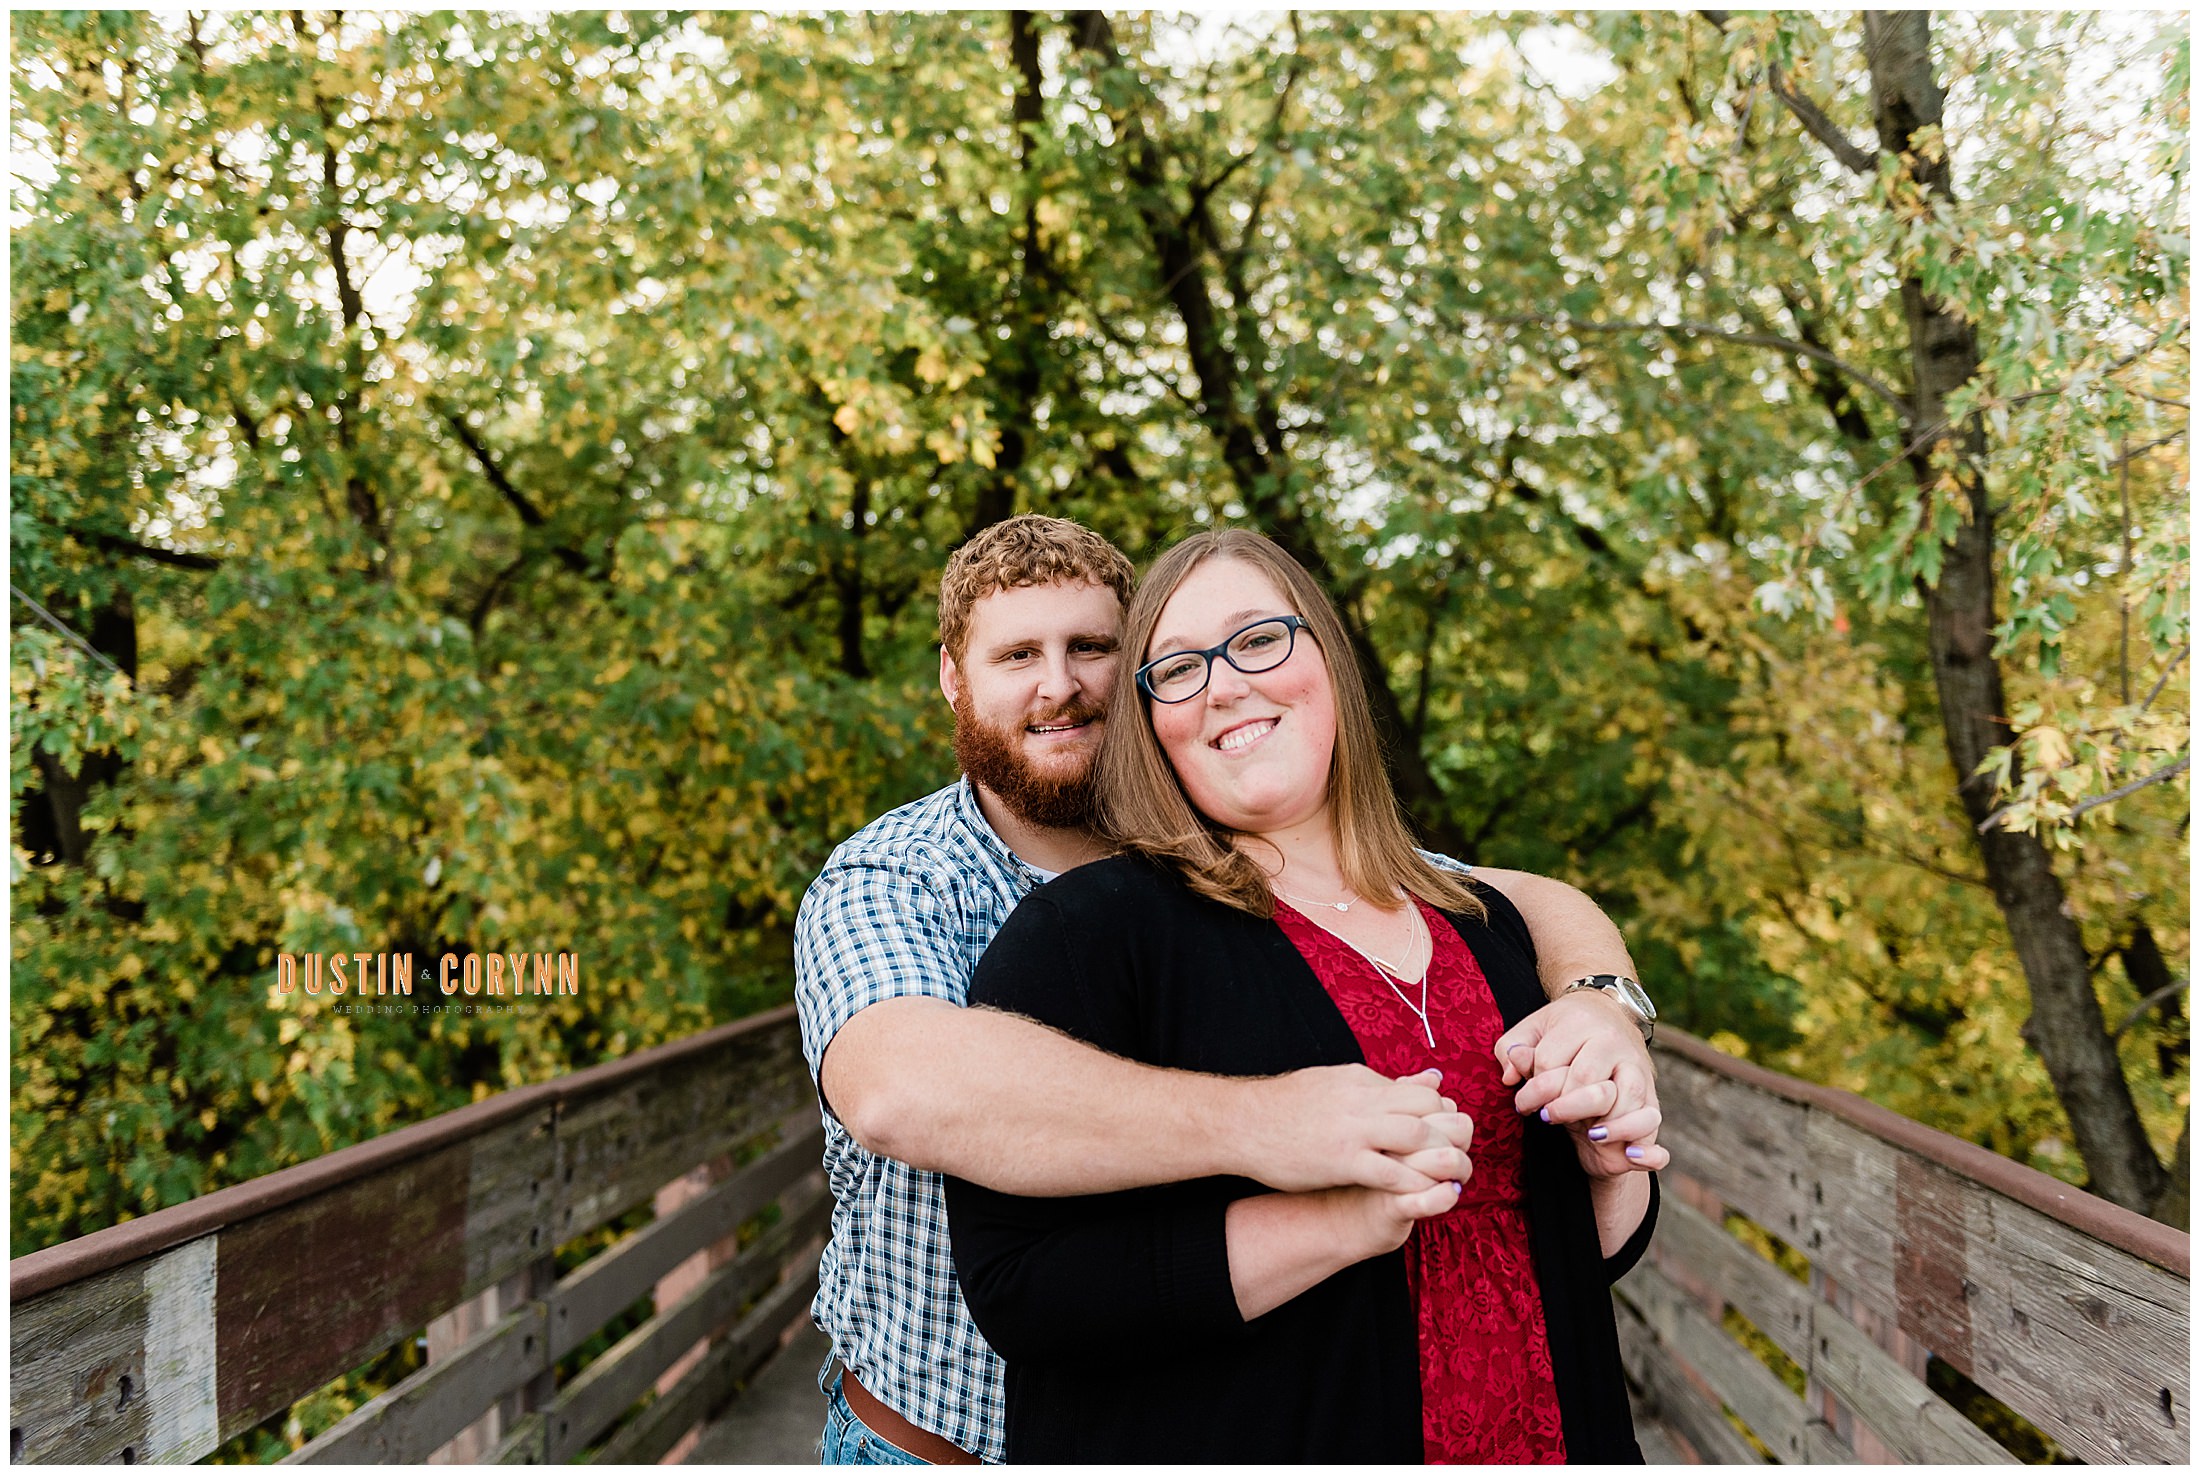 Headwaters Park Engagement